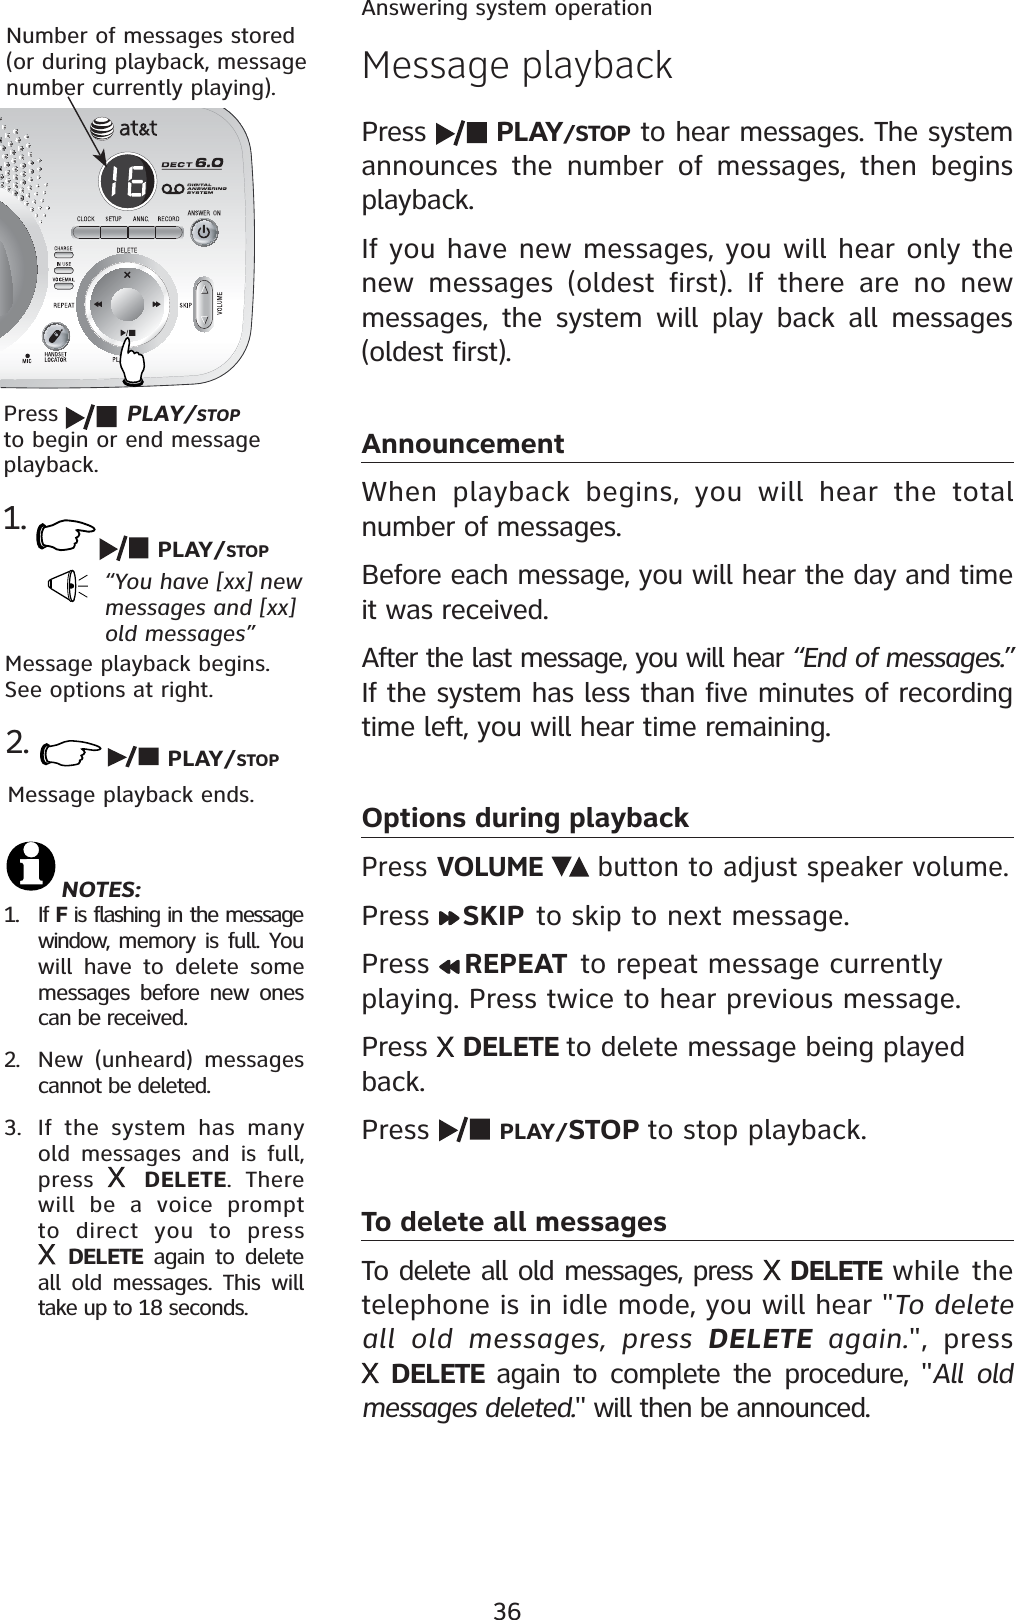 36Answering system operationMessage playbackPress  PLAY/STOP to hear messages. The system announces the number of messages, then begins playback.If you have new messages, you will hear only the new messages (oldest first). If there are no new messages, the system will play back all messages (oldest first). AnnouncementWhen playback begins, you will hear the total number of messages.Before each message, you will hear the day and time it was received.After the last message, you will hear “End of messages.”If the system has less than five minutes of recording time left, you will hear time remaining.Options during playbackPress VOLUME  button to adjust speaker volume.Press  SKIP to skip to next message.Press  REPEAT  to repeat message currently playing. Press twice to hear previous message. Press  DELETE to delete message being played back.Press  PLAY/STOP to stop playback.To delete all messagesTo delete all old messages, press  DELETE while the telephone is in idle mode, you will hear &quot;To delete all old messages, press DELETE again.&quot;, press DELETE  again to complete the procedure, &quot;All old messages deleted.&quot; will then be announced. Number of messages stored (or during playback, message number currently playing).NOTES:1. If F is flashing in the message window,  memory is full. You will have to delete some messages before new ones can be received.2. New (unheard) messages cannot be deleted.3. If the system has many old messages and is full, press  DELETE. There will be a voice prompt to direct you to press DELETE again to delete all old messages. This will take up to 18 seconds. Press  PLAY/STOPto begin or end message playback.1.“You have [xx] new messages and [xx] old messages”Message playback begins. See options at right.PLAY/STOP2.Message playback ends. PLAY/STOP